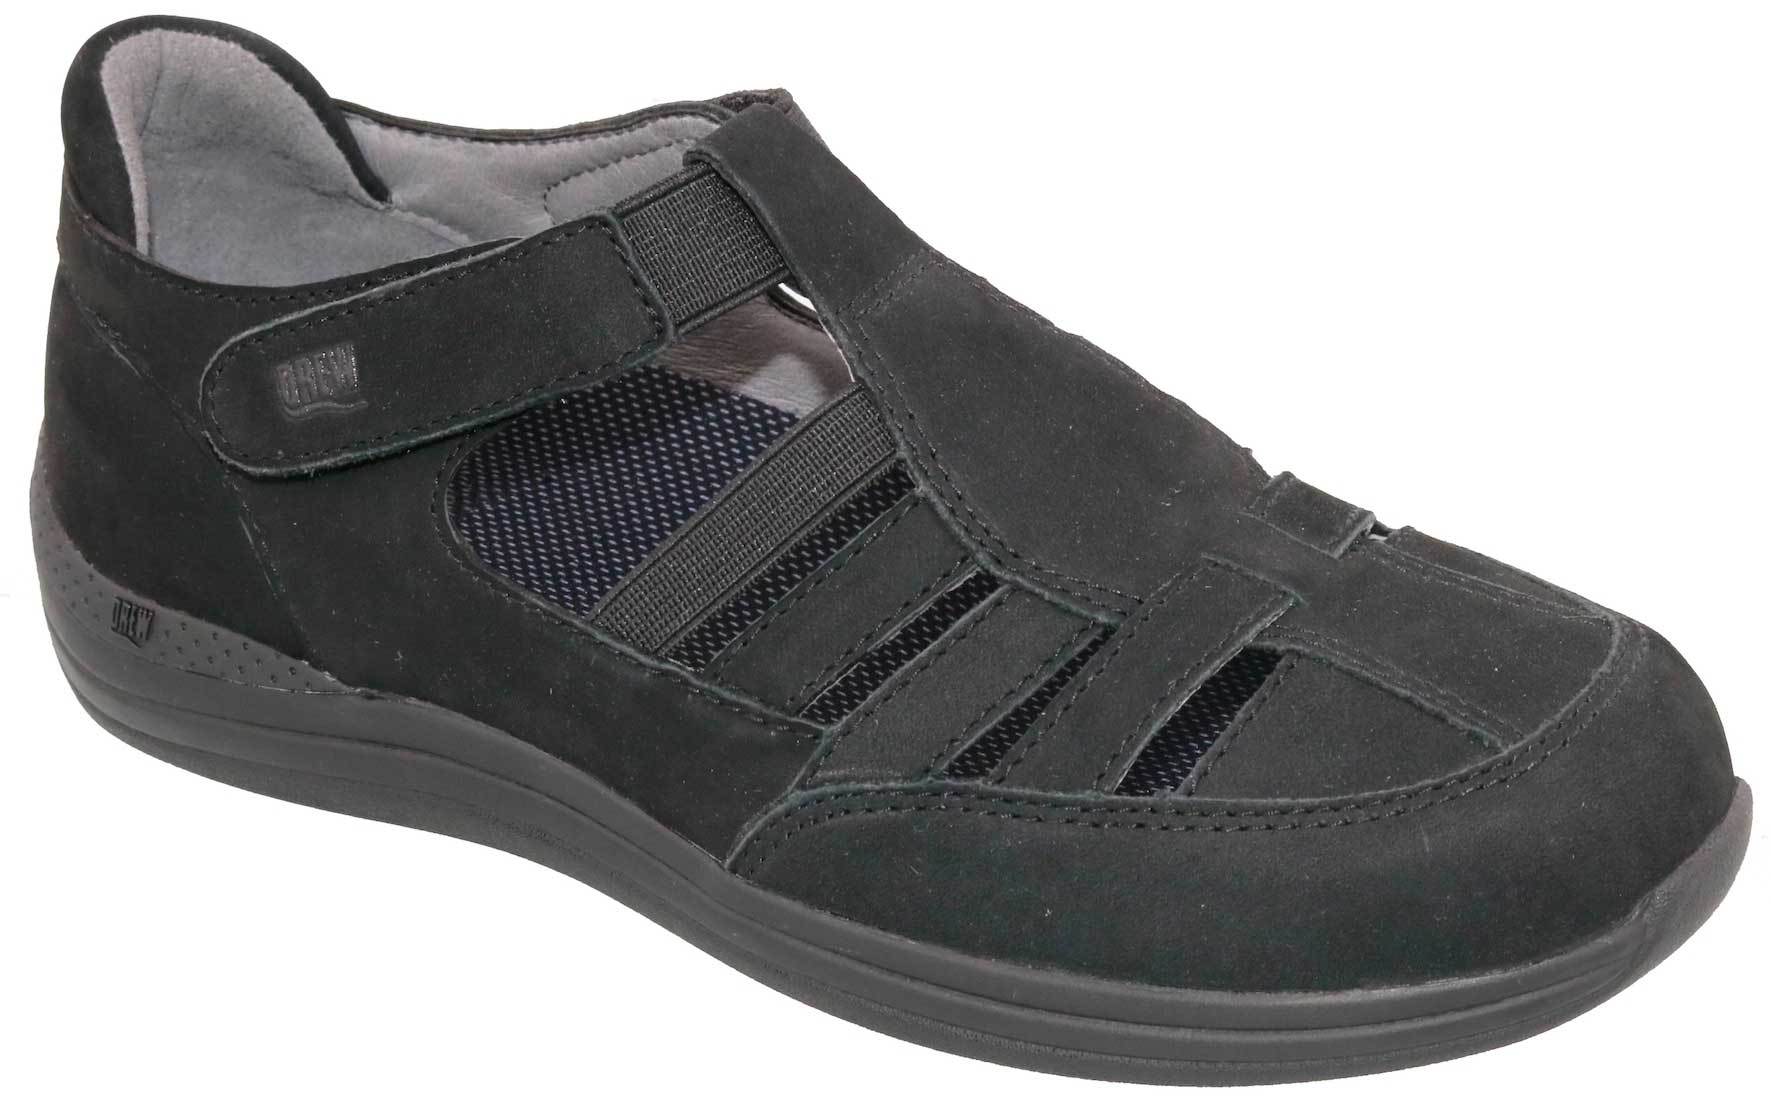 Drew Shoes Maryann 14792 - Women's Casual Comfort Therapeutic Diabetic Shoe - Extra Depth For Orthotics